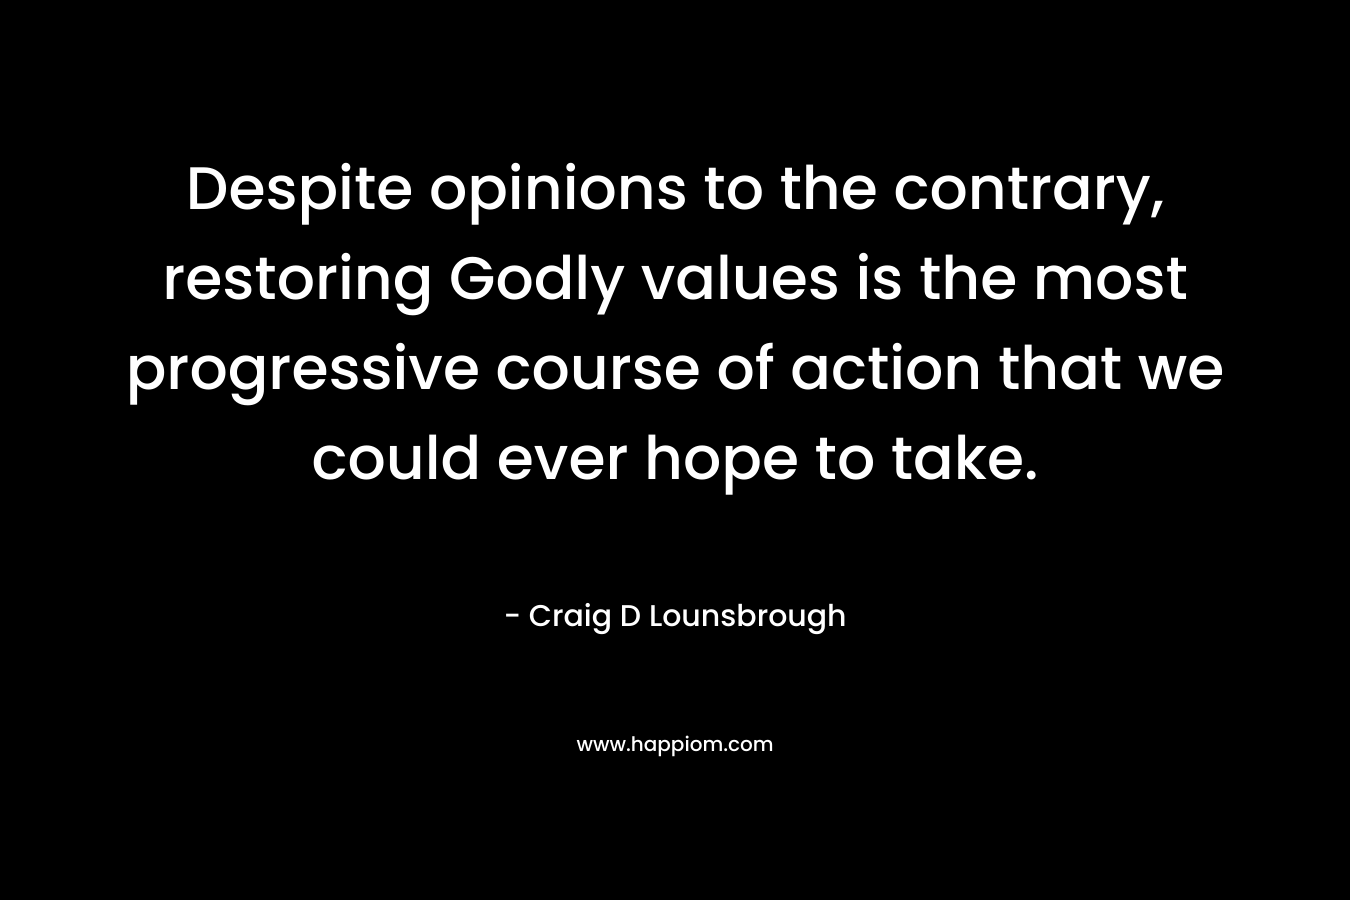 Despite opinions to the contrary, restoring Godly values is the most progressive course of action that we could ever hope to take.